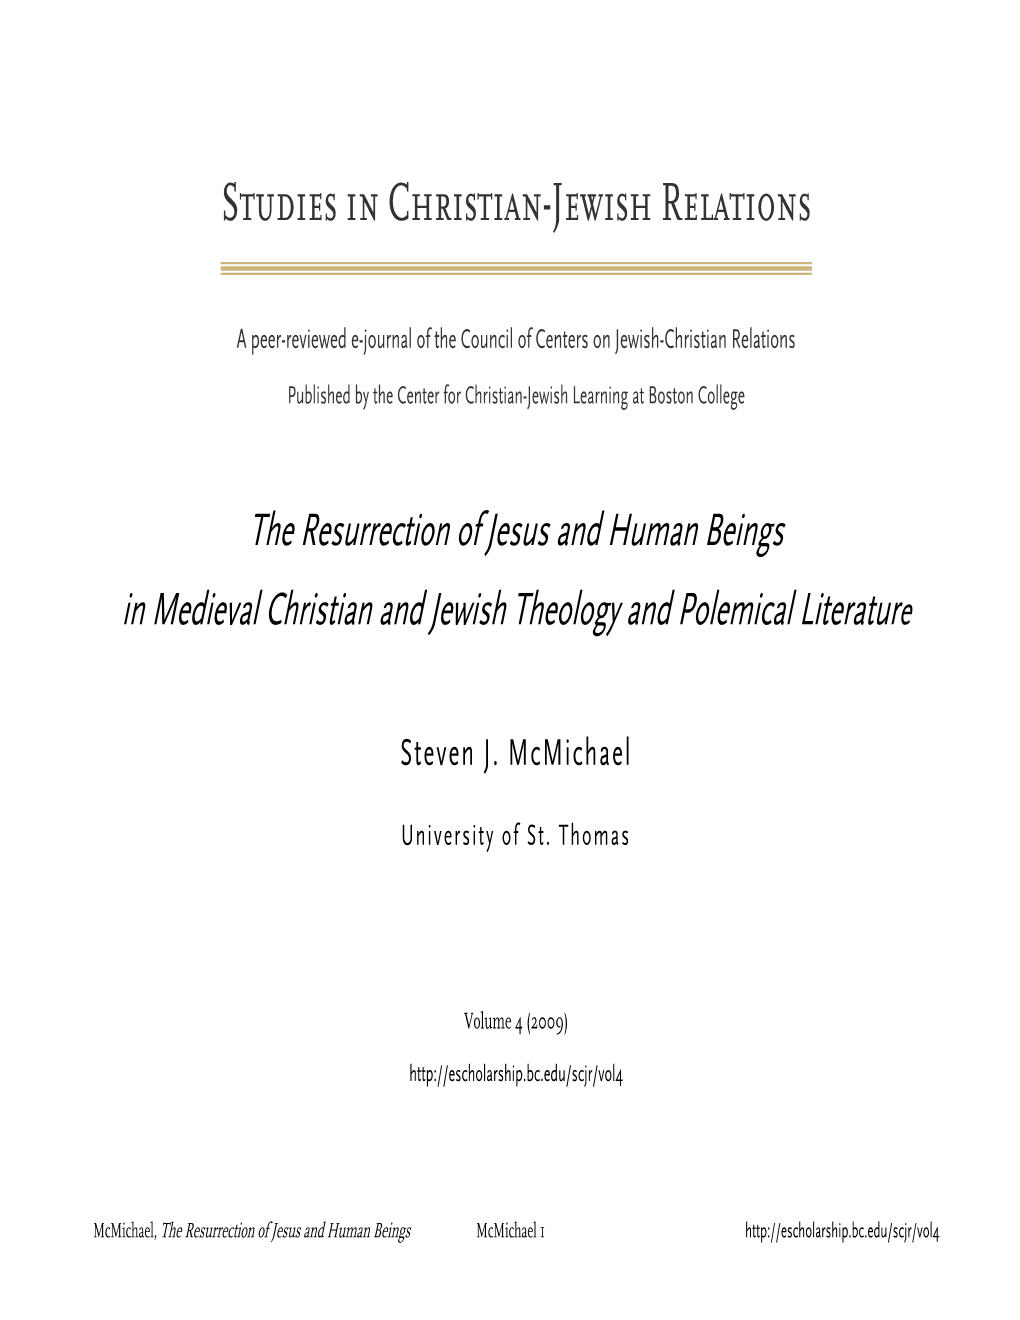 The Resurrection of Jesus and Human Beings in Medieval Christian and Jewish Theology and Polemical Literature